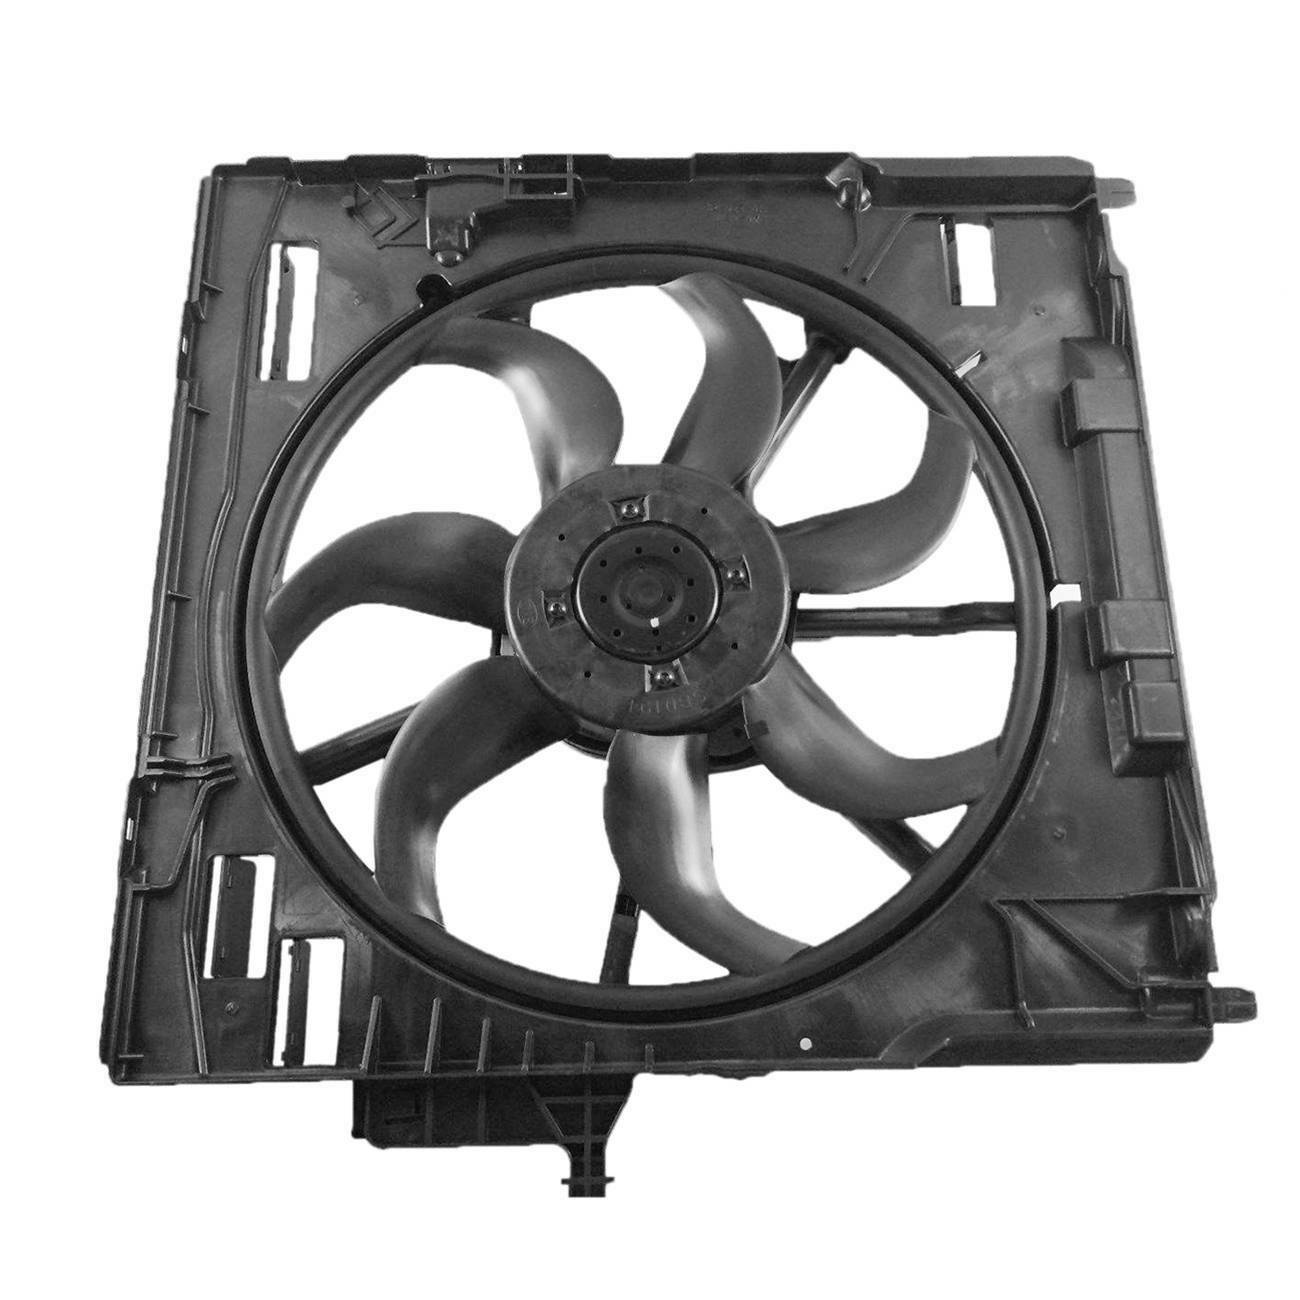 Radiator Cooling Fan Assembly for BMW X5 E70 3.0si 4.8i N52 17427533558 German Made